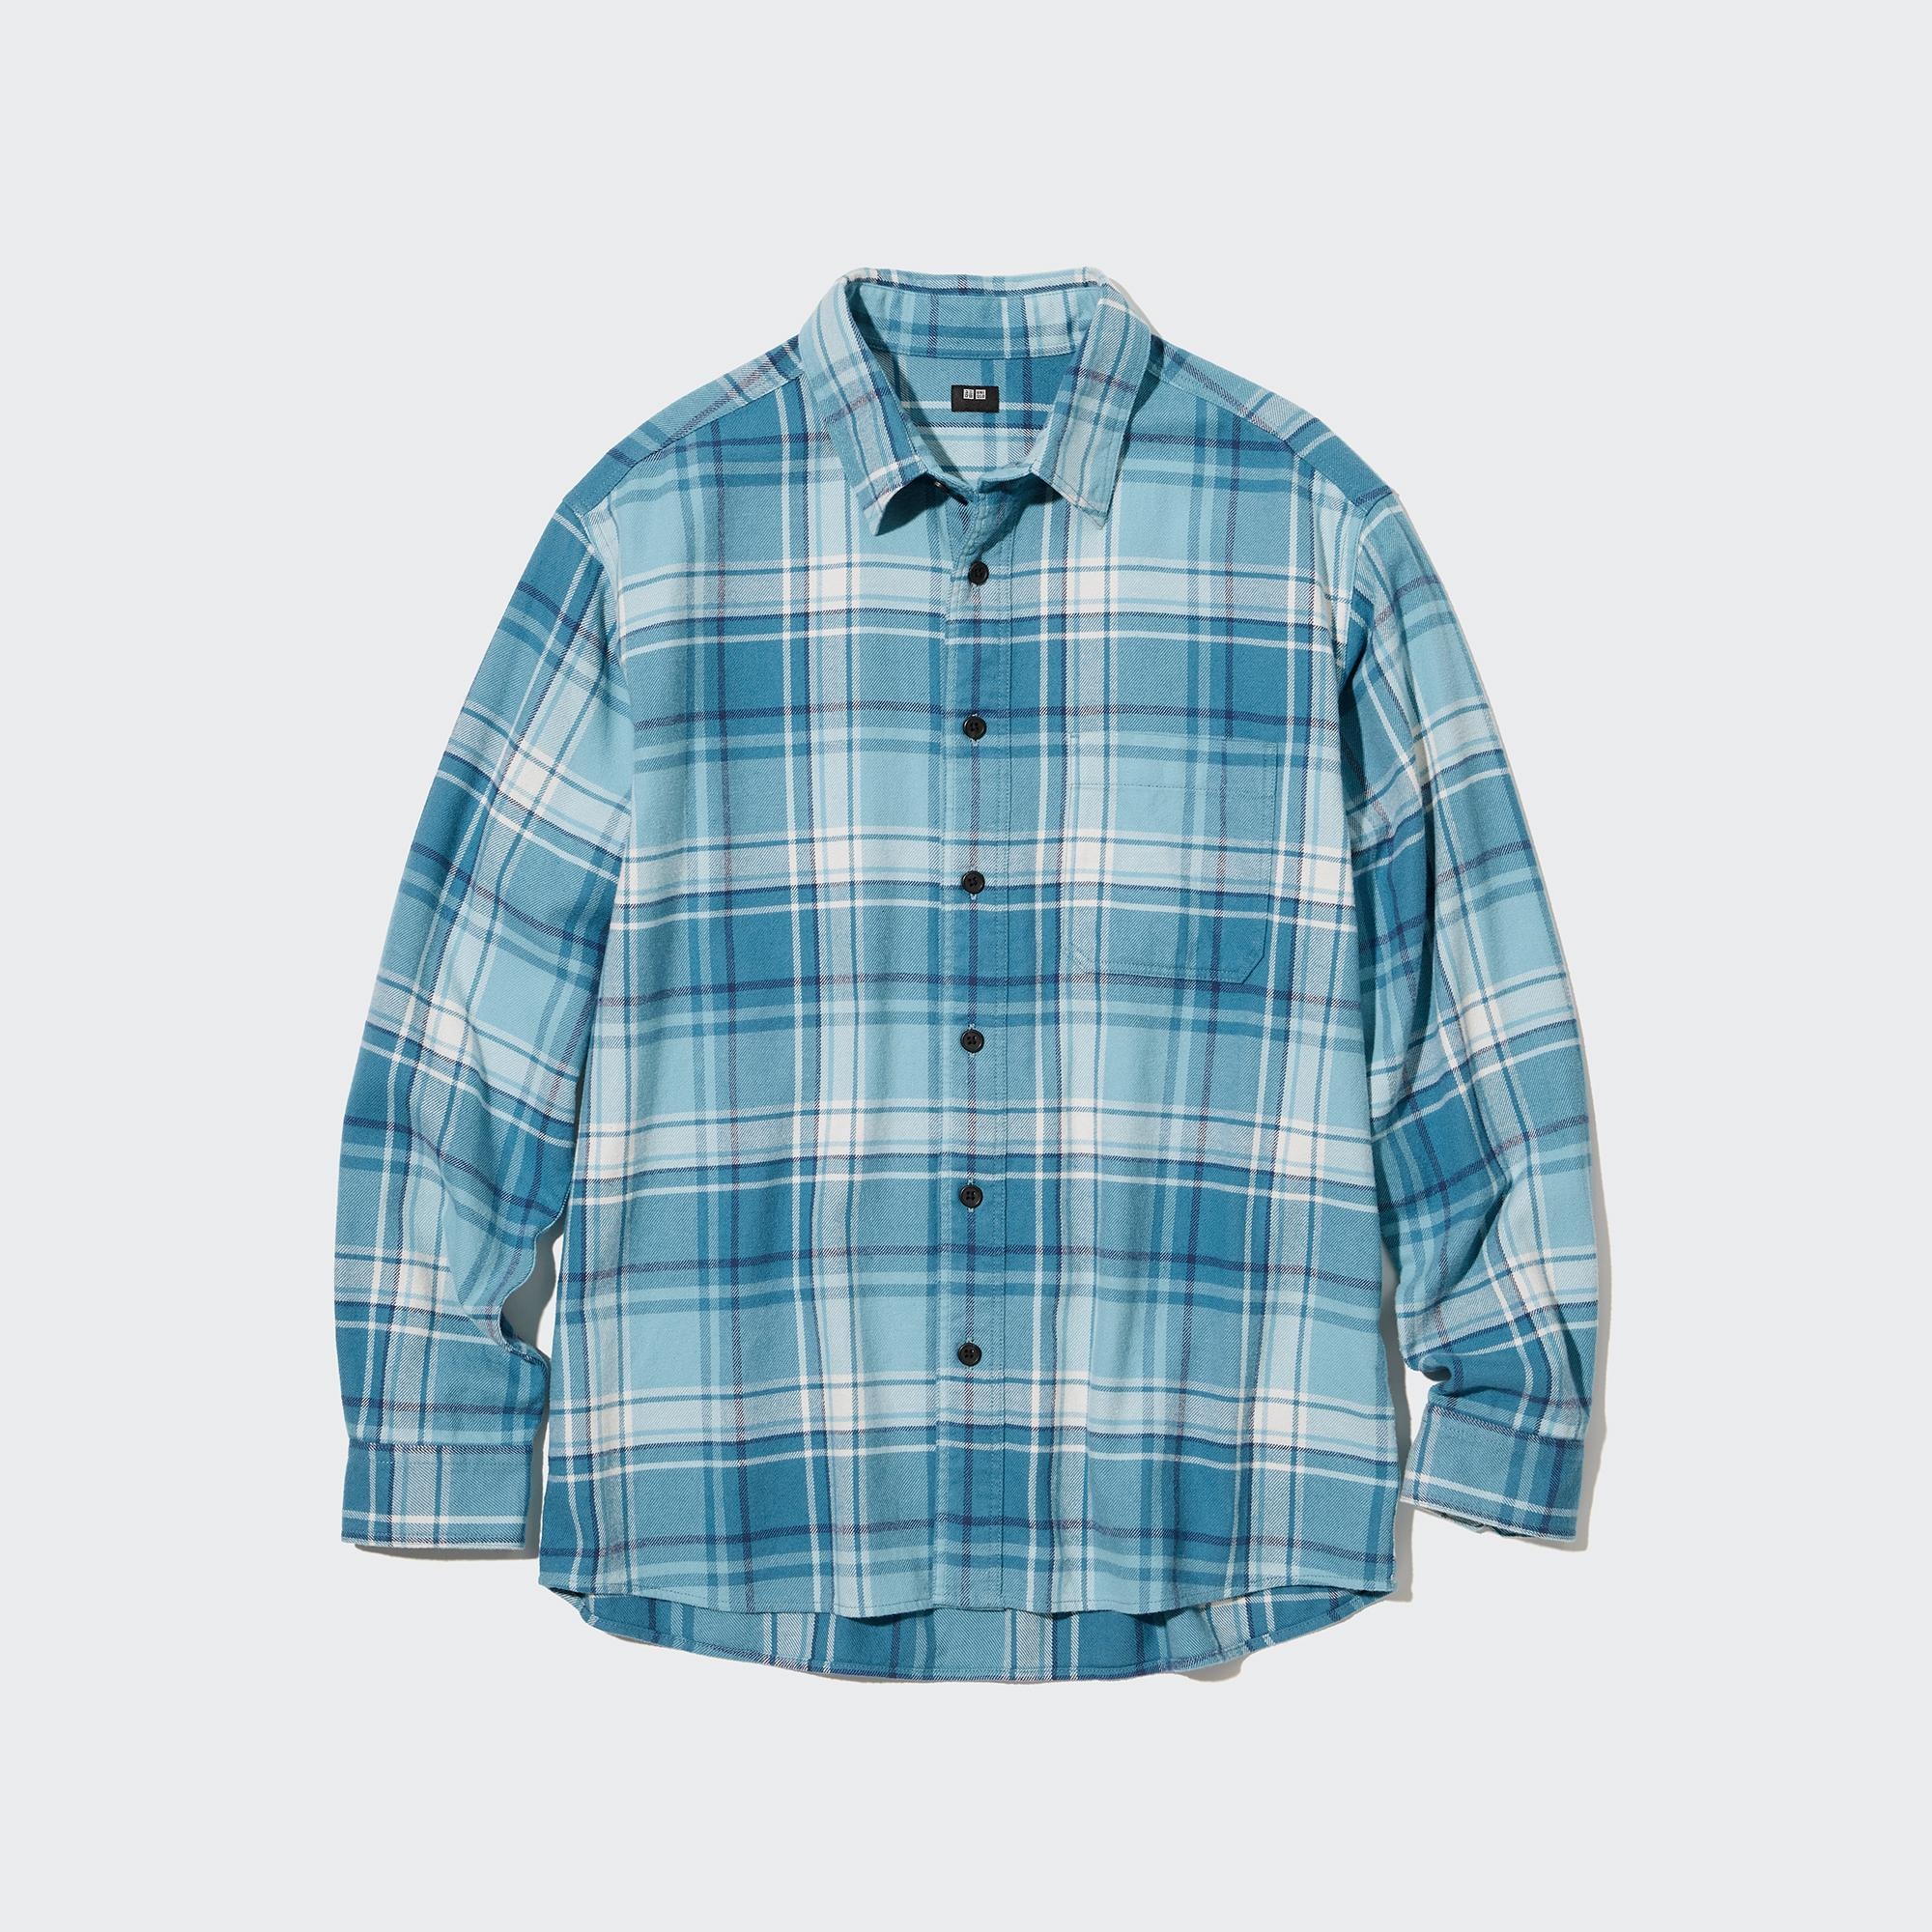 MENS FLANNEL CHECKED LONG SLEEVE SHIRT  UNIQLO VN